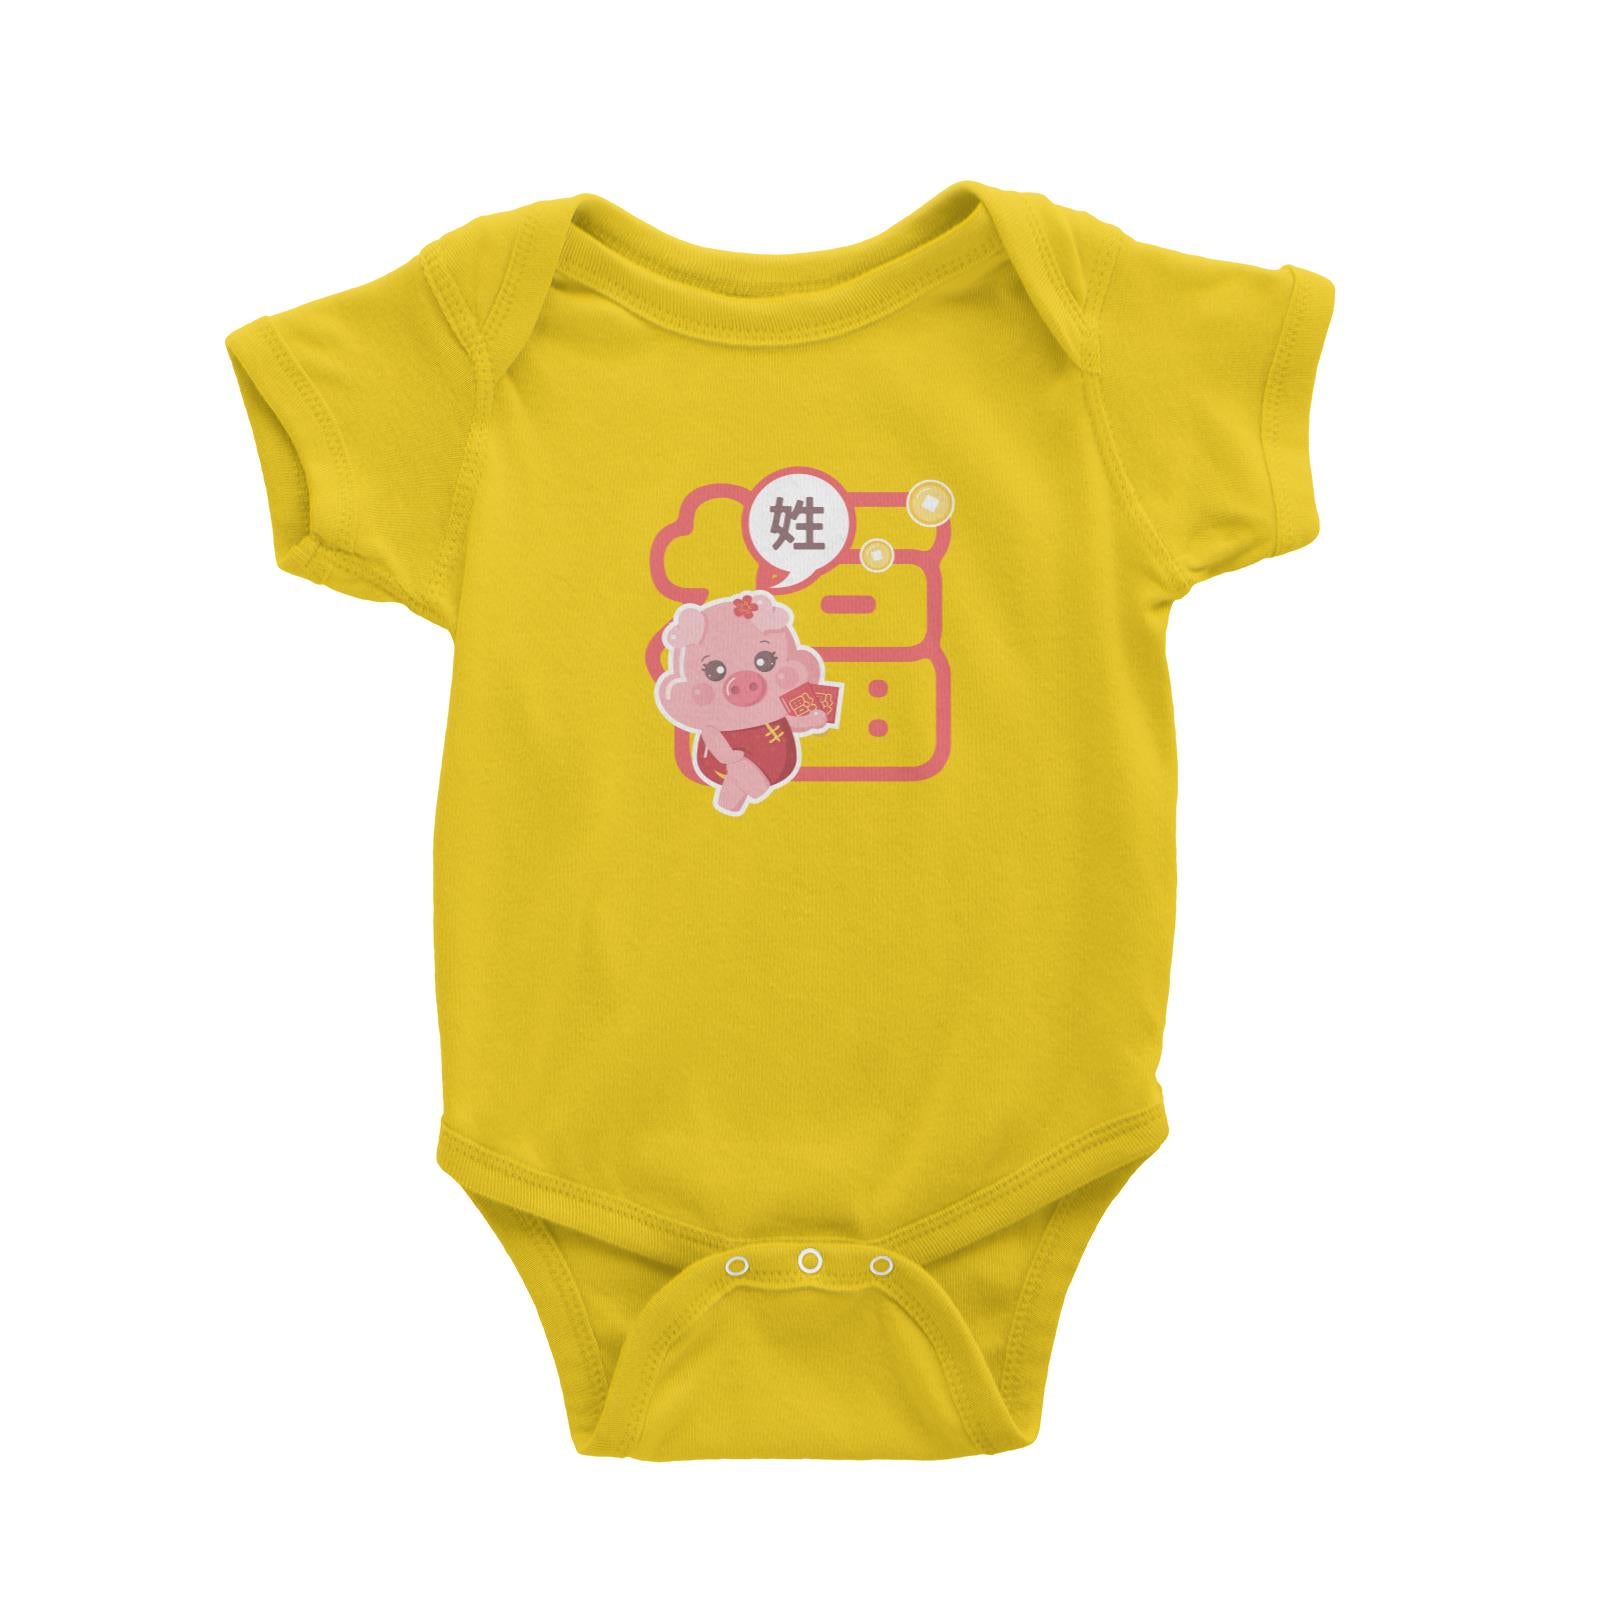 Chinese New Year Cute Pig Good Fortune Girl With Addname Baby Romper